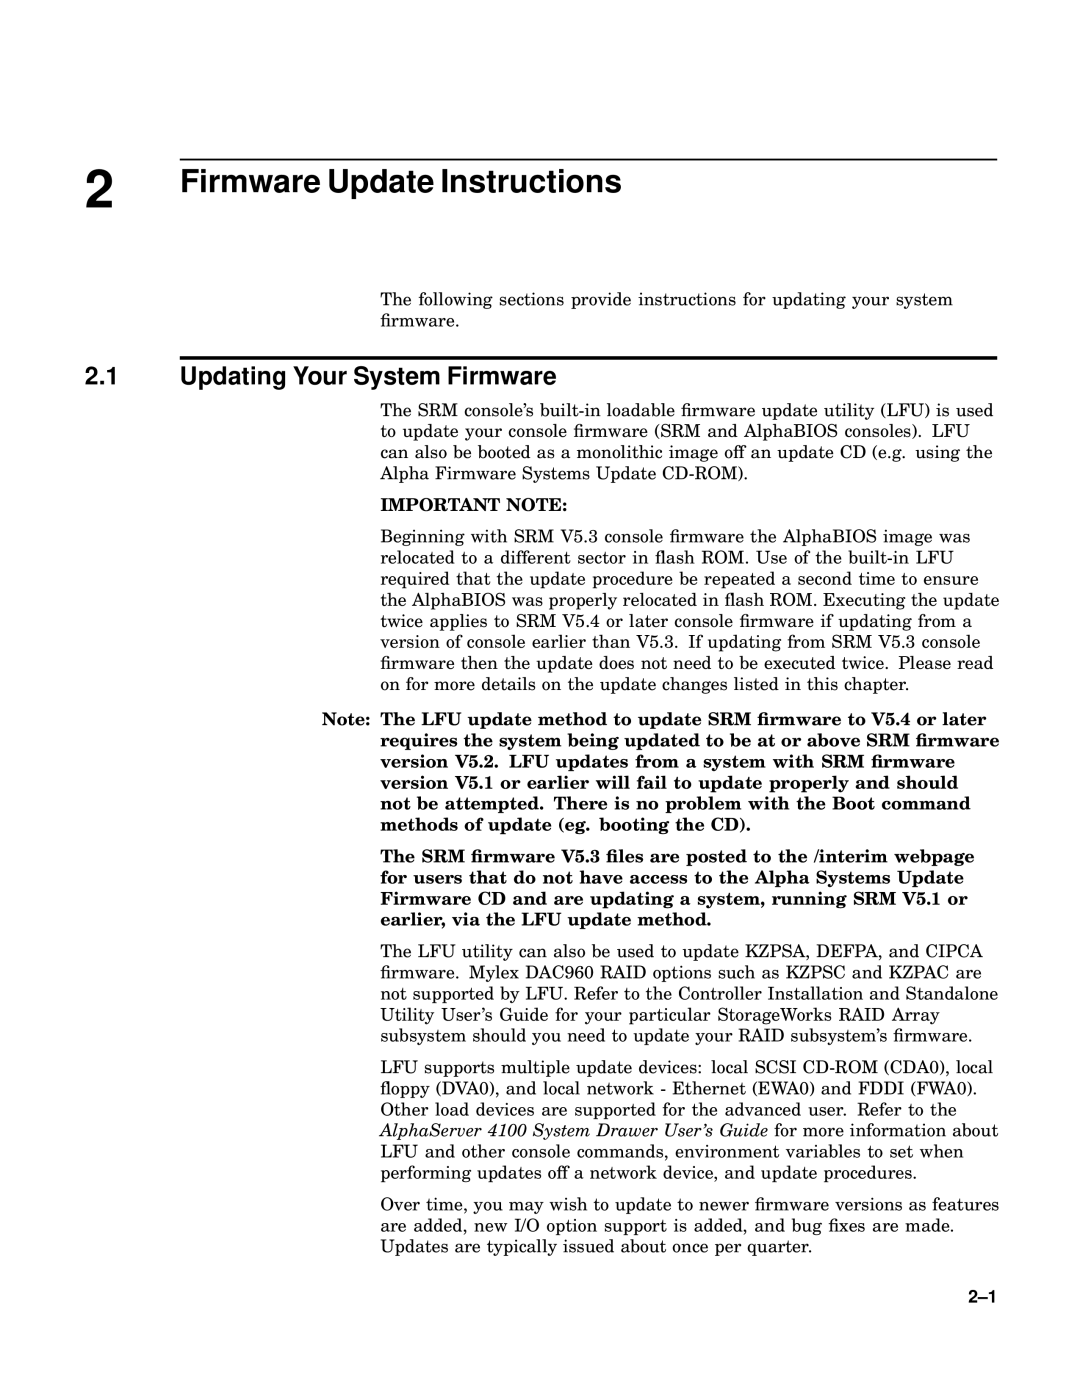 Compaq 4100 manual Firmware Update Instructions, Updating Your System Firmware 